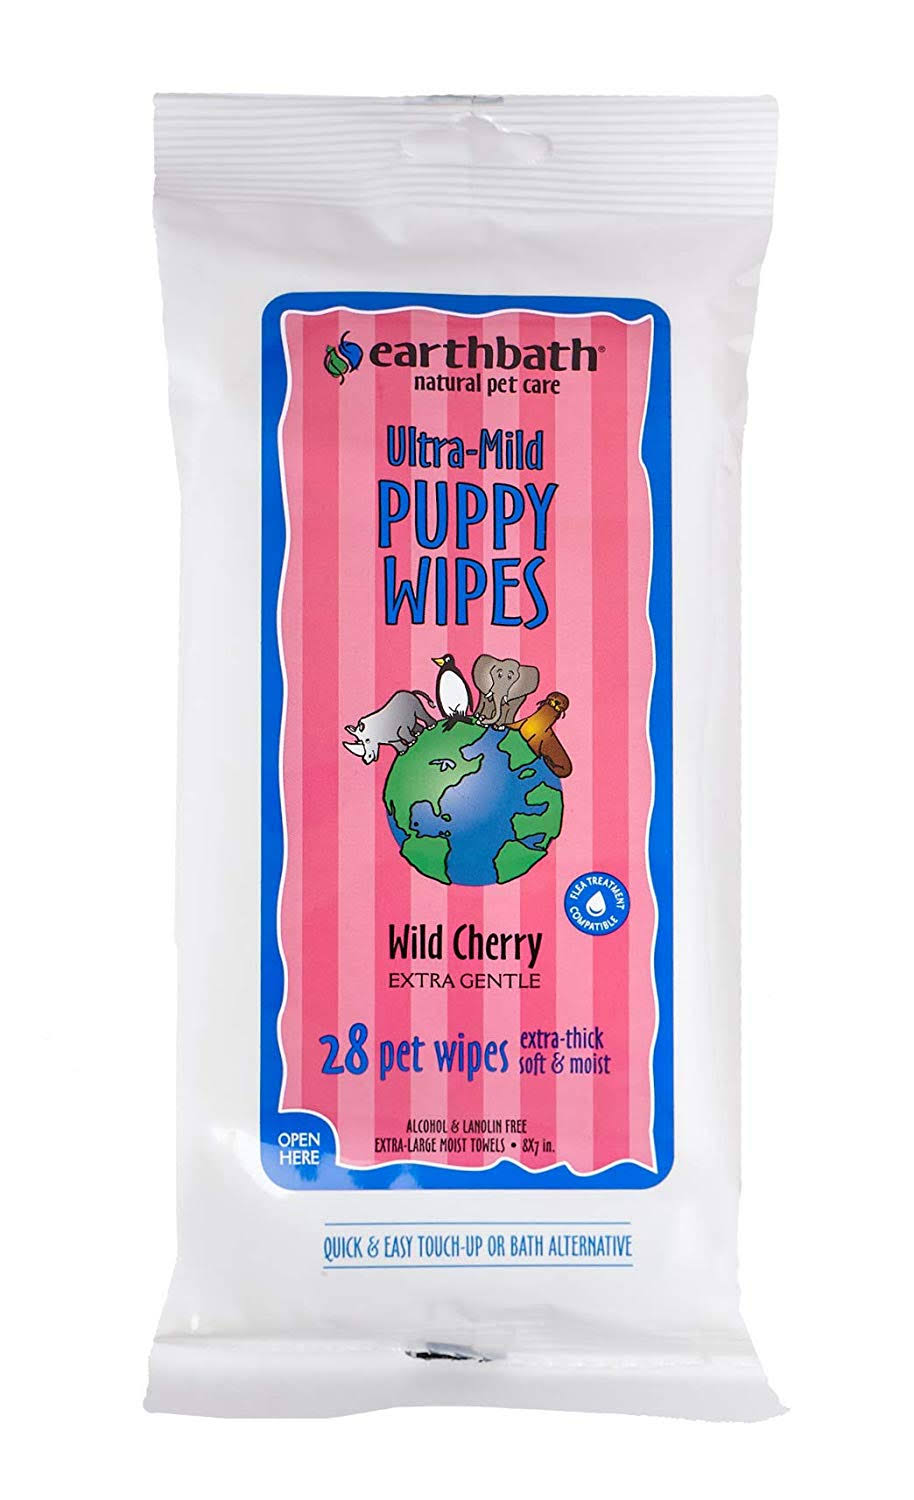 Earthbath Puppy Grooming Wipes - 28 Count, Travel Pack